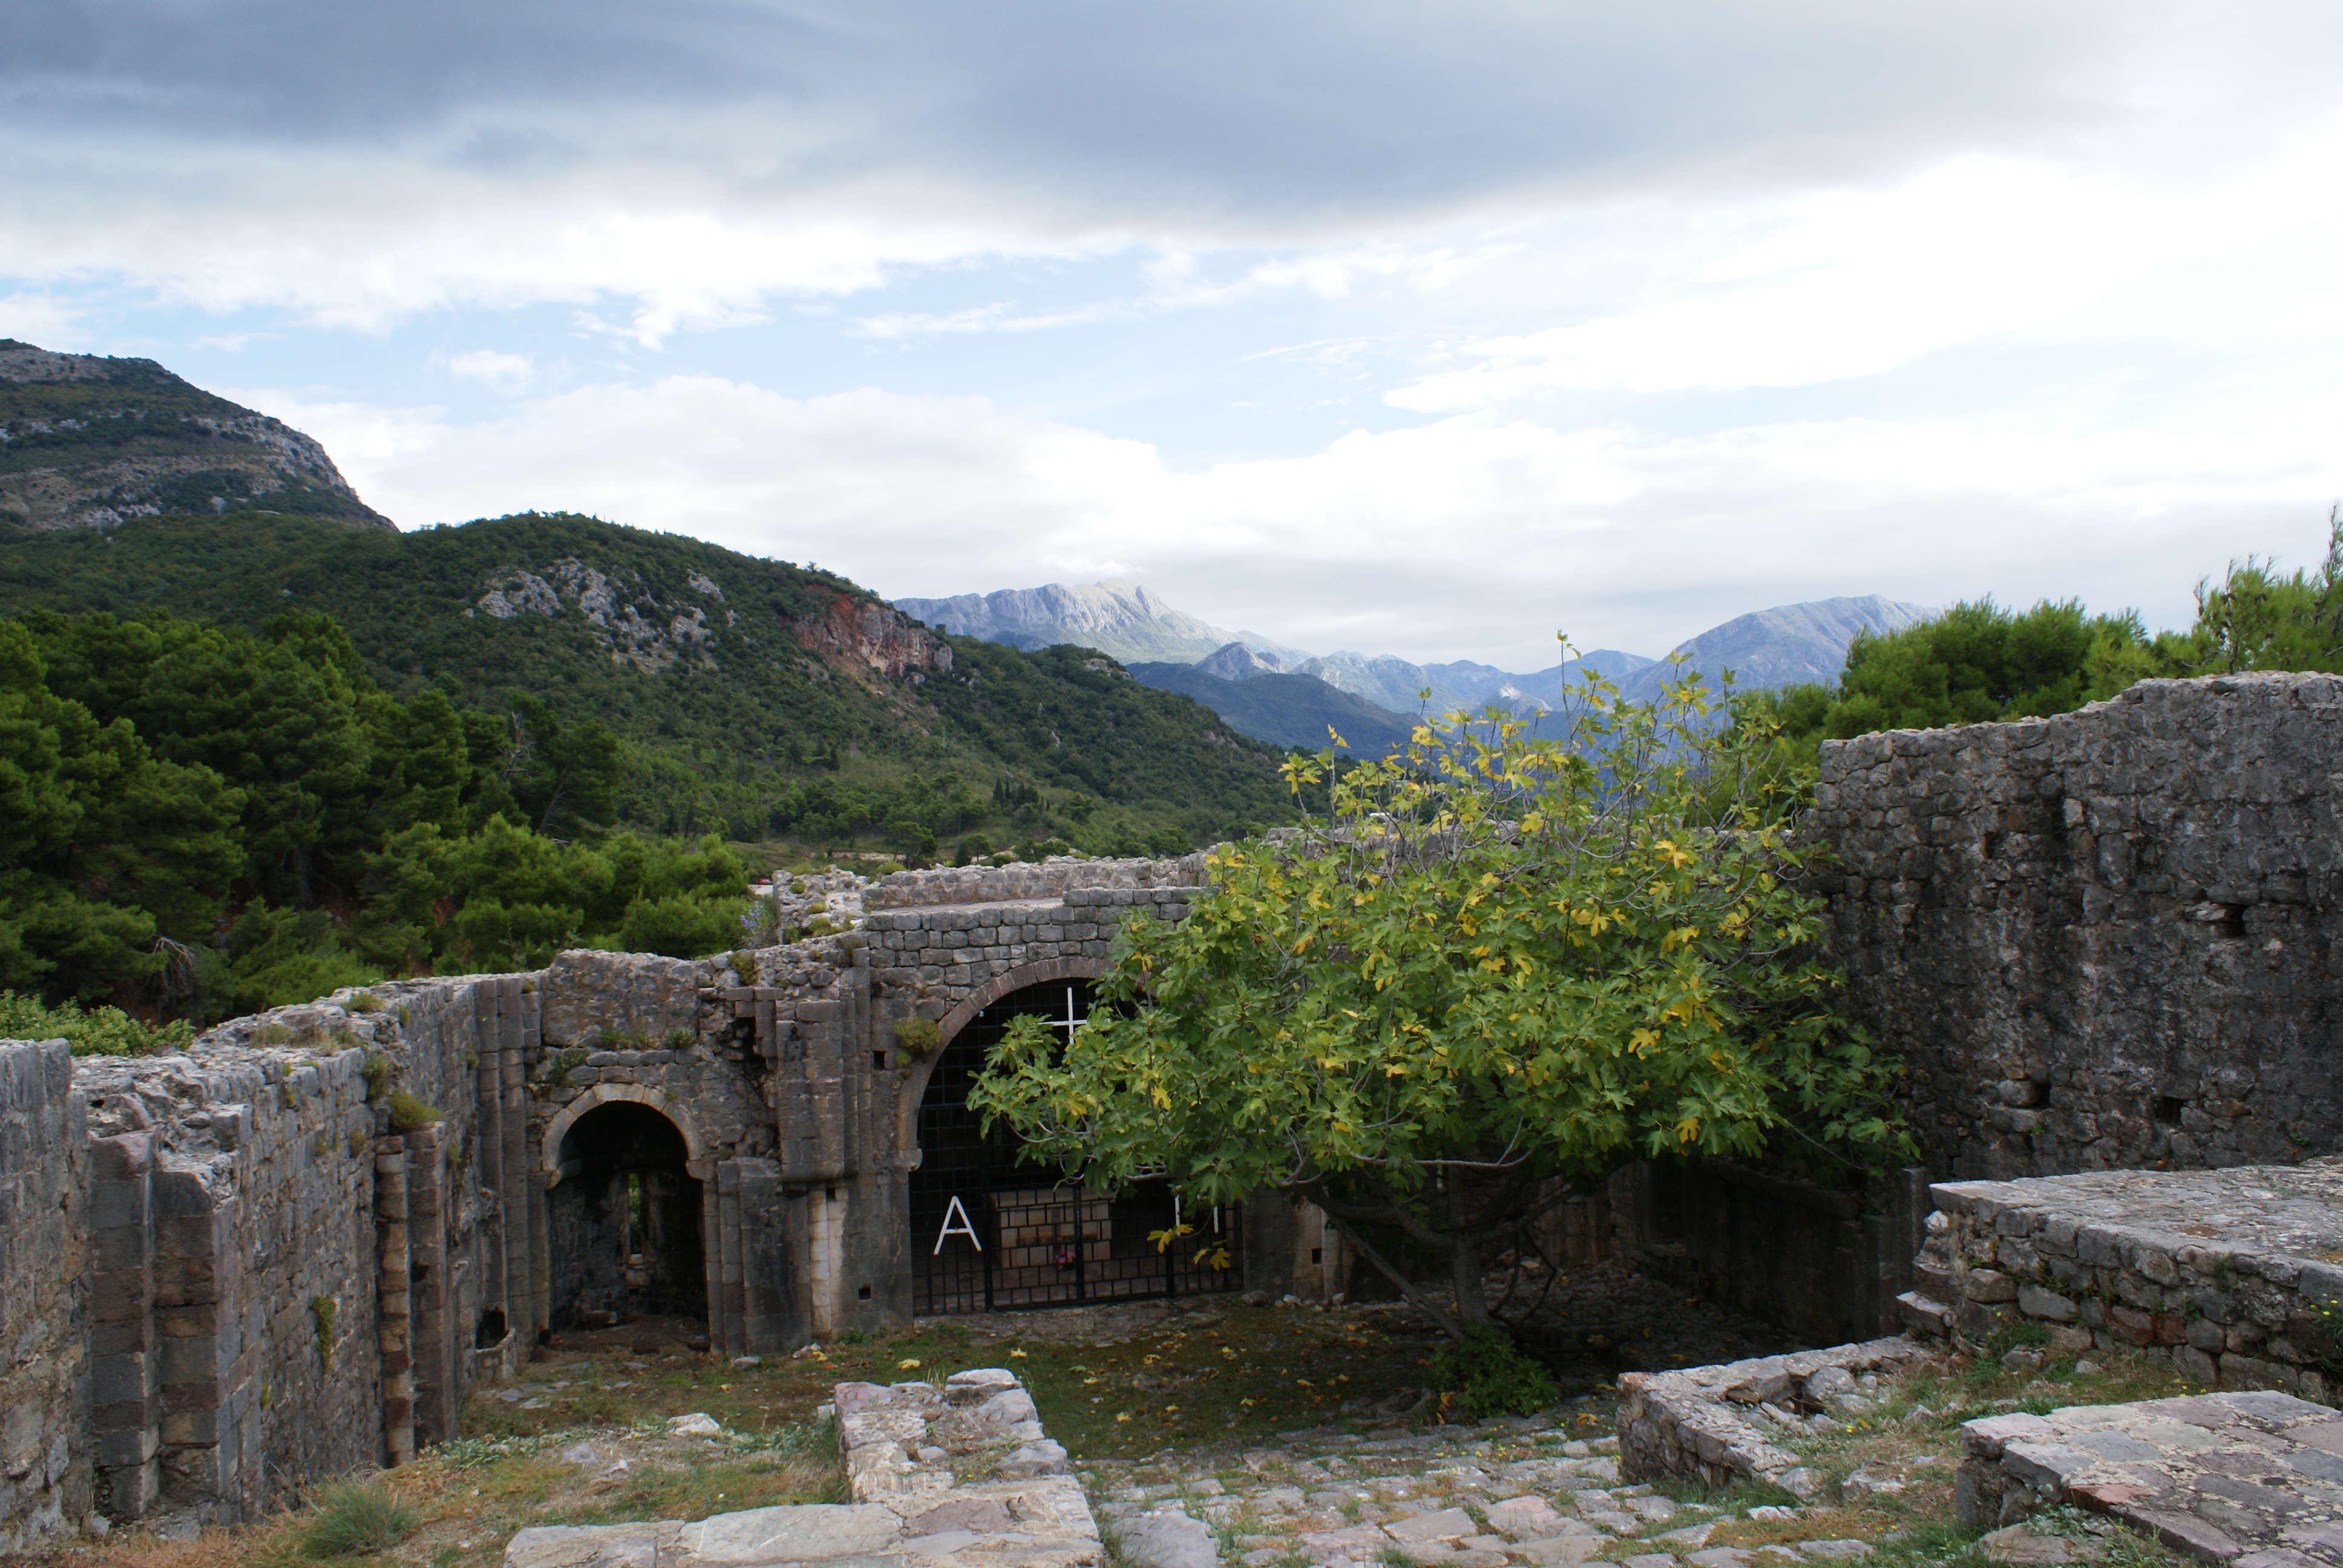 The former Latin (Catholic) monastery of Ratac from the 12th/13th century near the town of Bar, Republic of Montenegro.